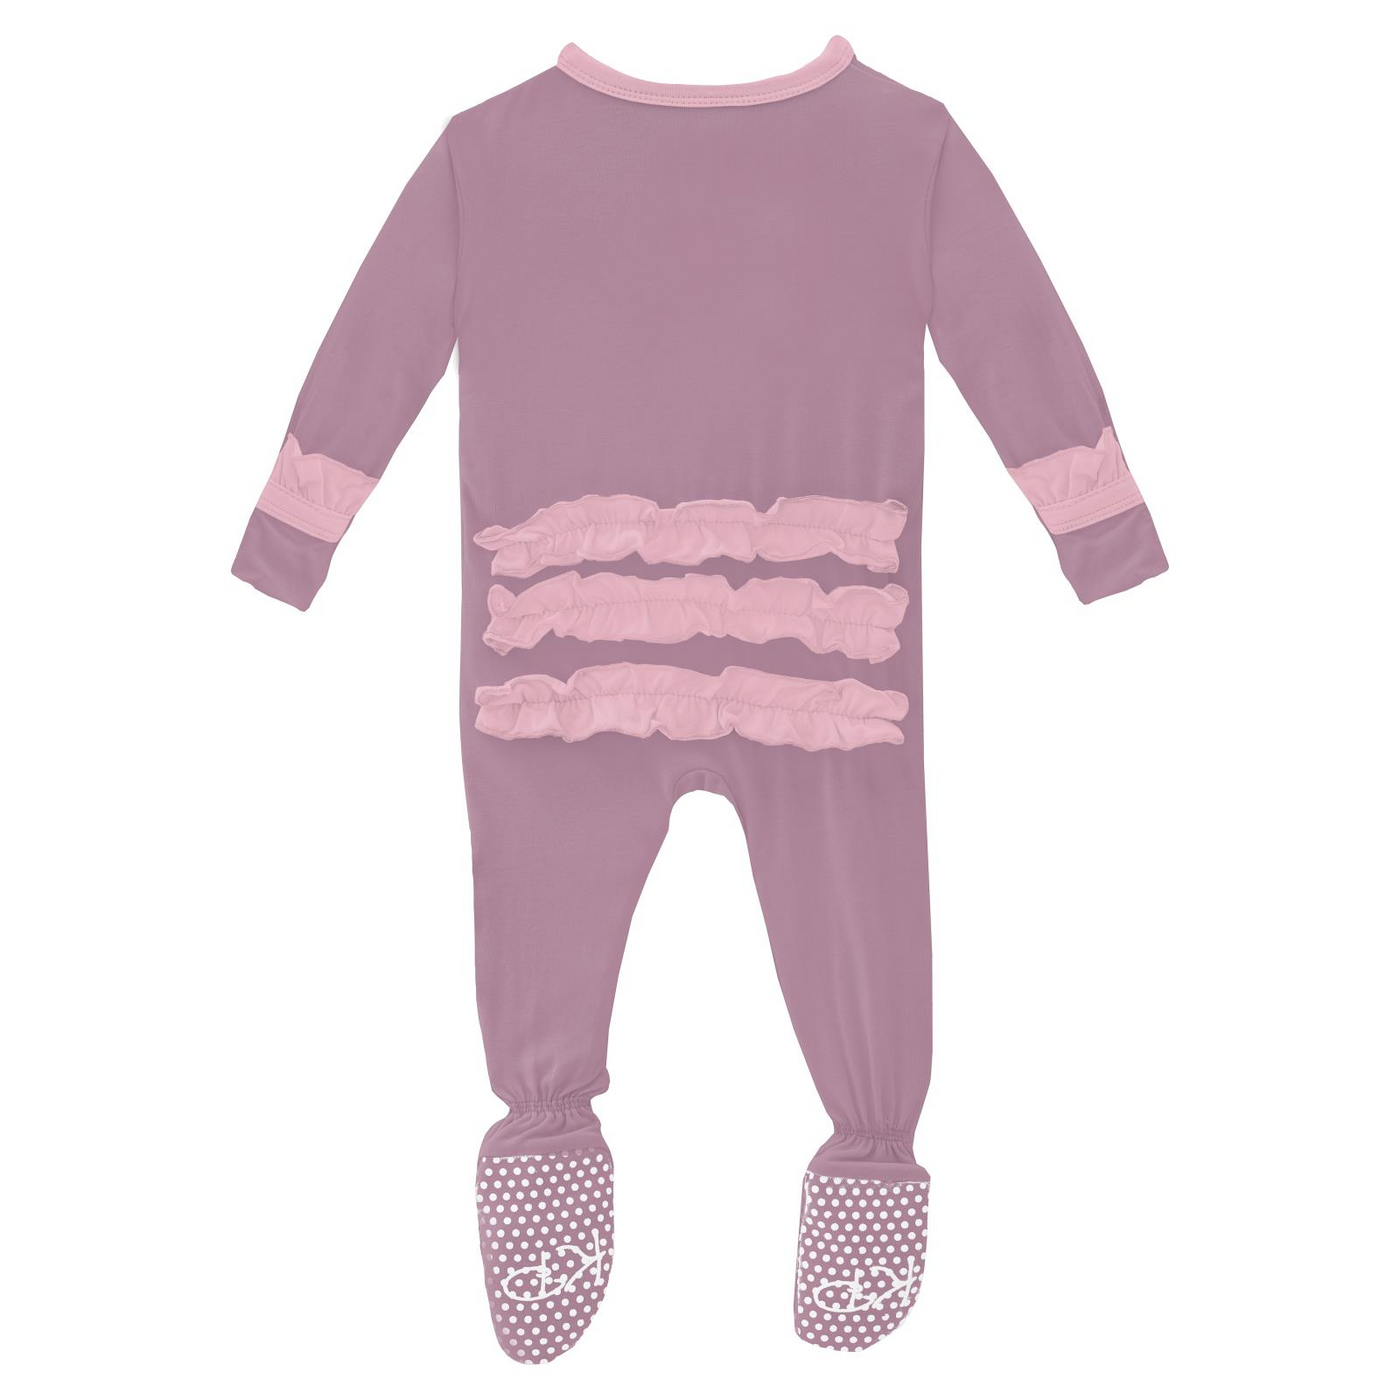 Kickee Pants Classic Ruffle Footie with 2 Way Zipper:  Solid Pegasus with Cake Pop